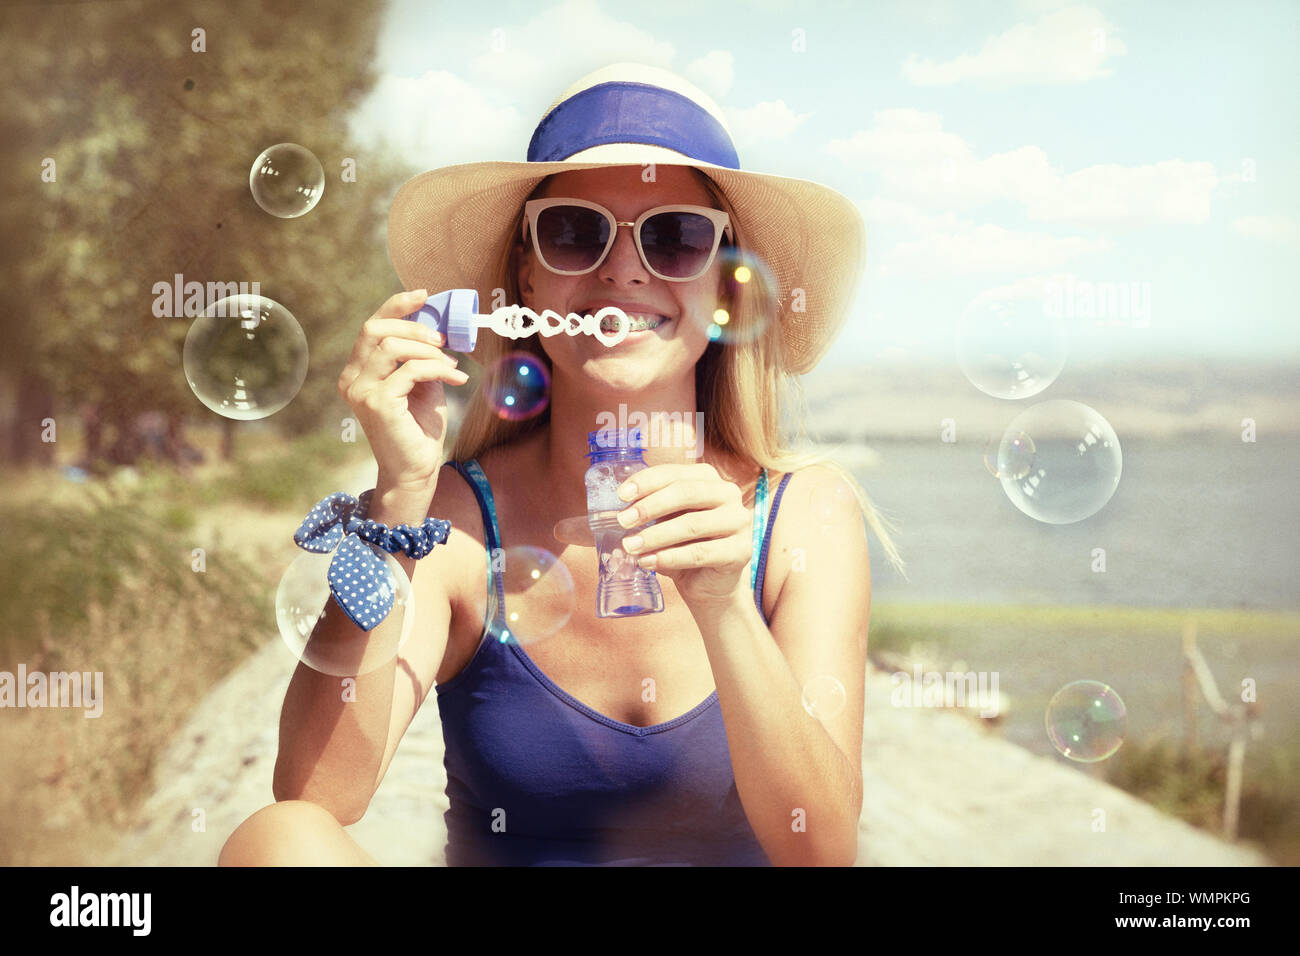 Young woman blowing soap bubbles in a park Stock Photo